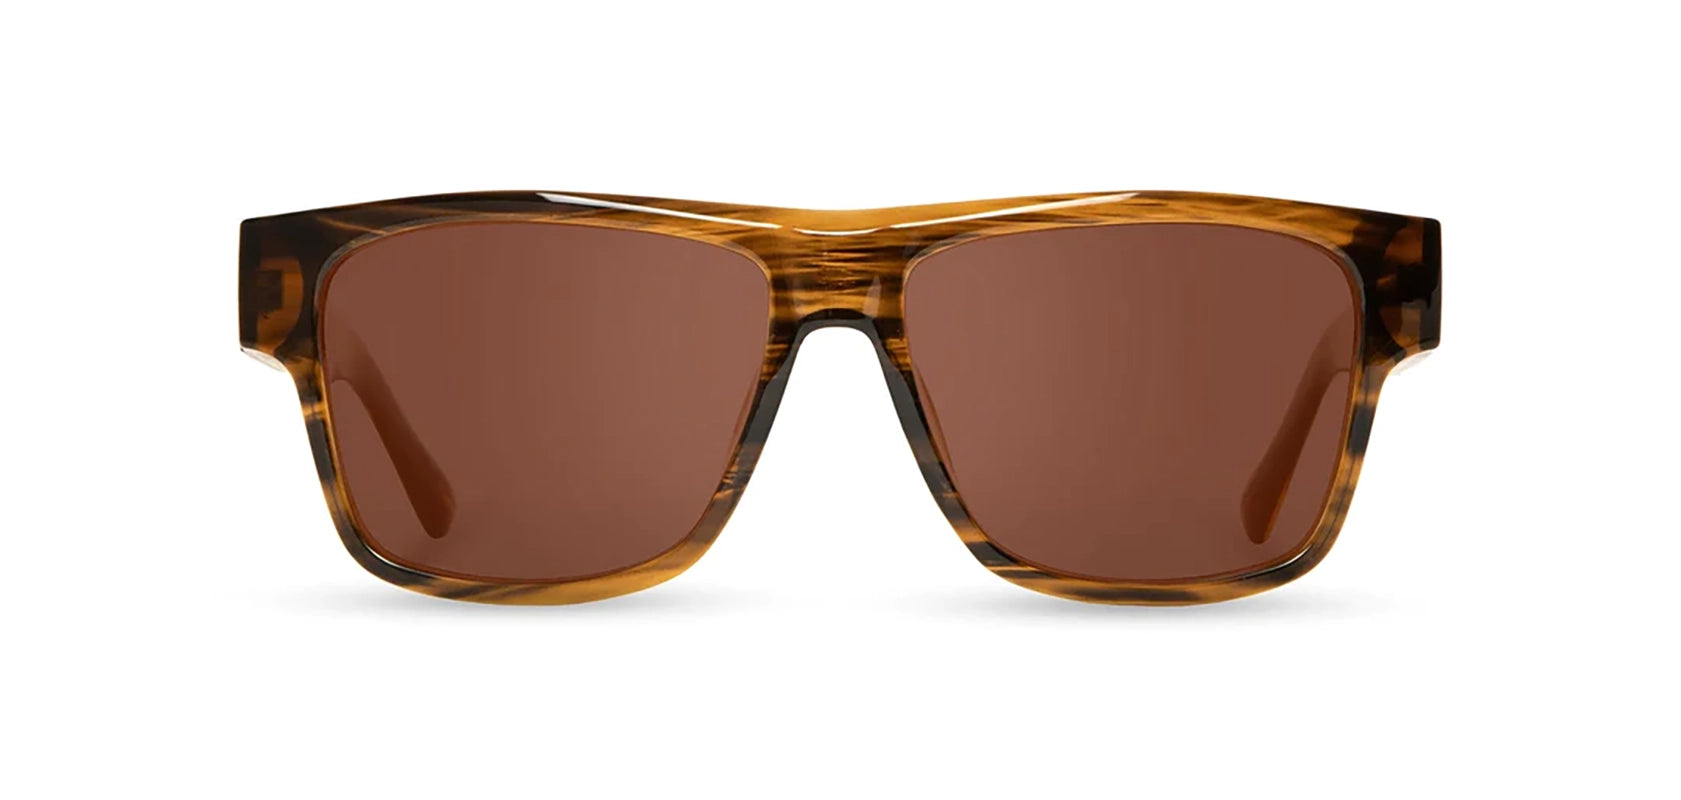 Shwood Camp - Cliff Sunglasses with Tortoise/walnut frames and Brown Polarized lenses, front view